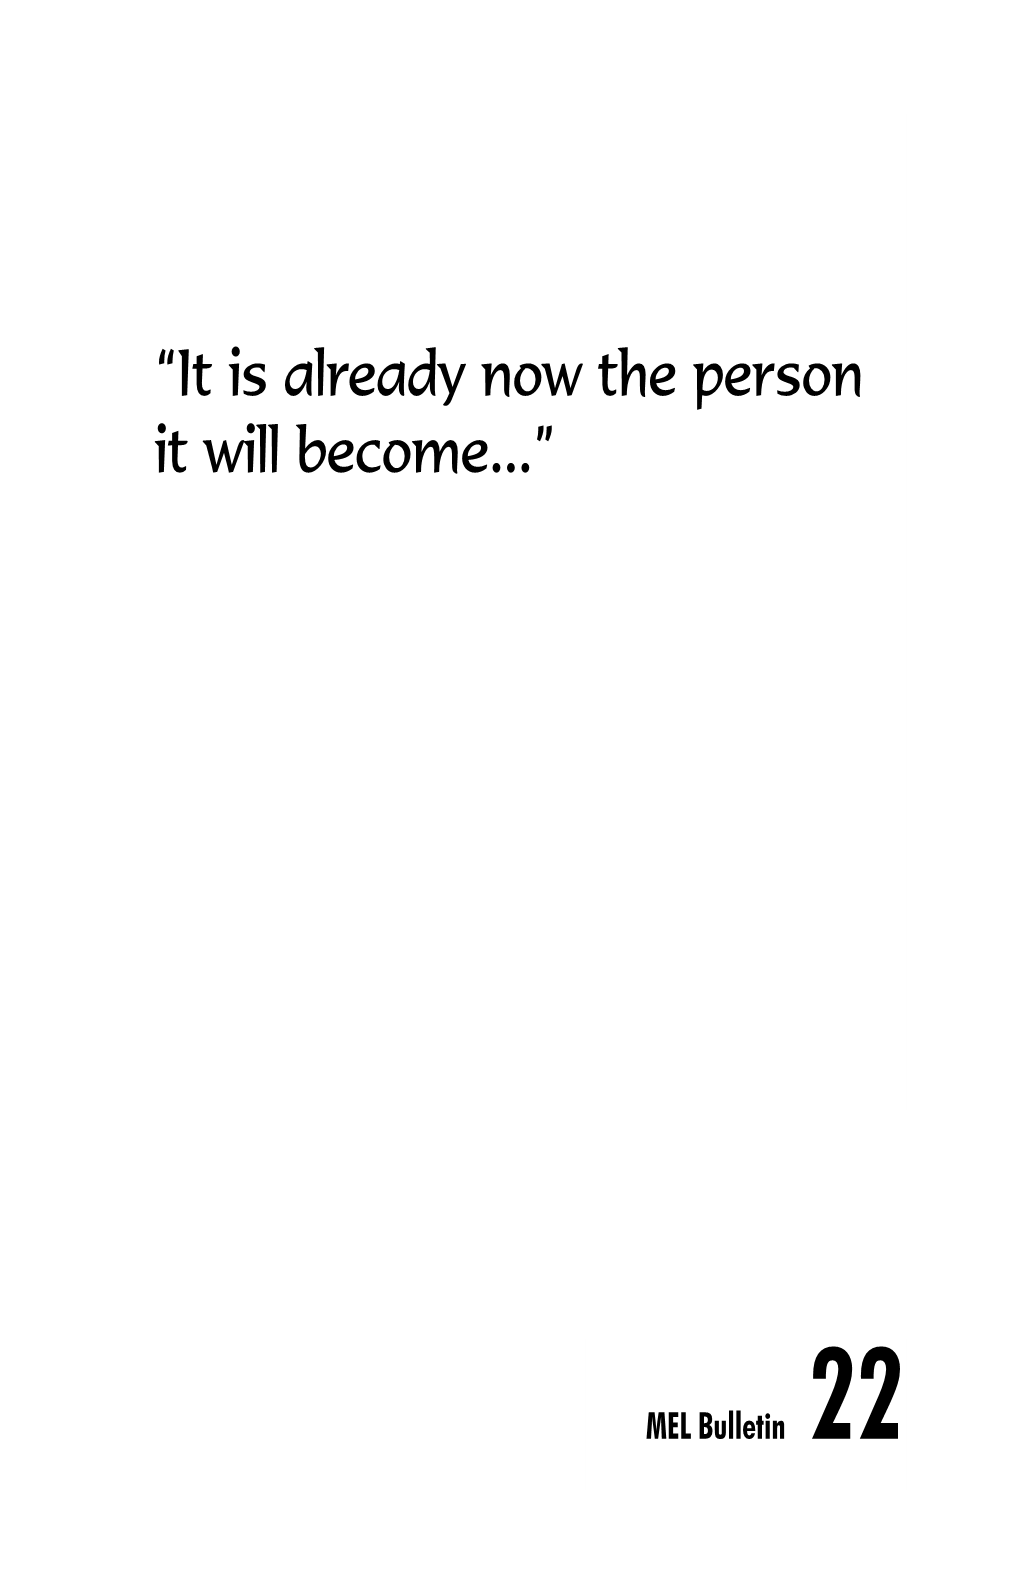 “It Is Already Now the Person It Will Become...”